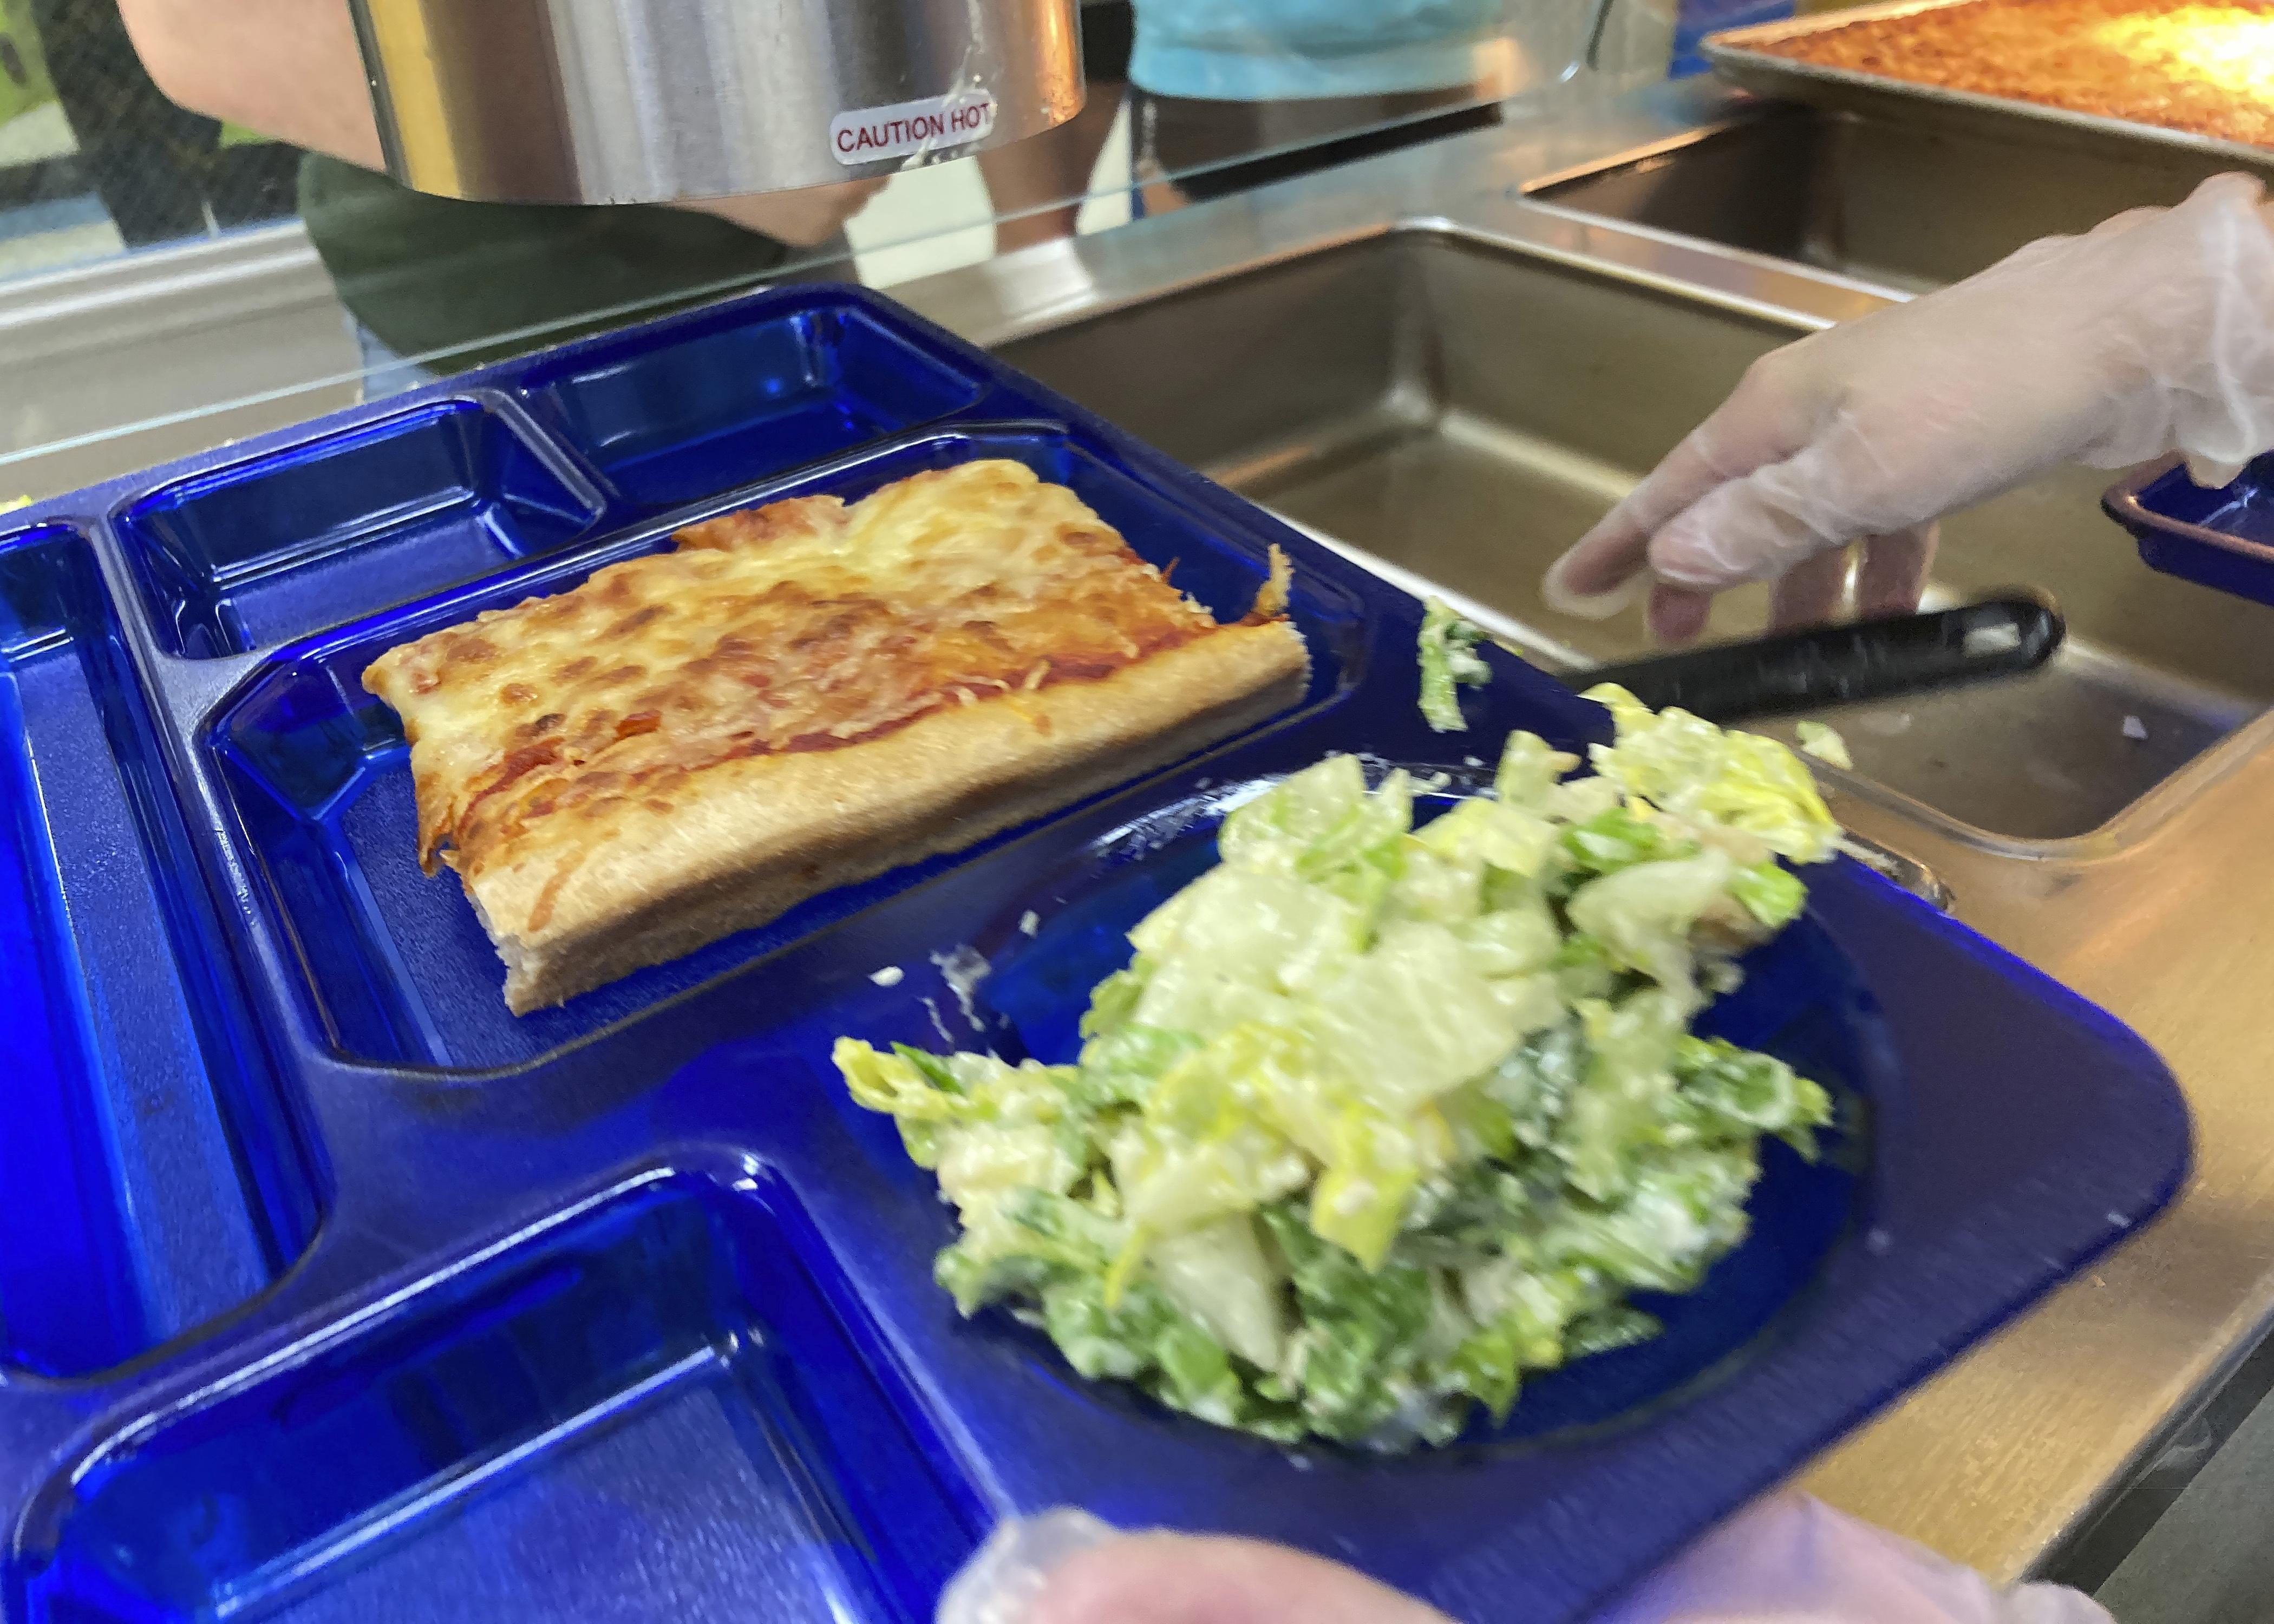 Fed Up with Lunch: The School Lunch Project: How One Anonymous Teacher  Revealed the Truth About School Lunches --And How We Can Change Them!